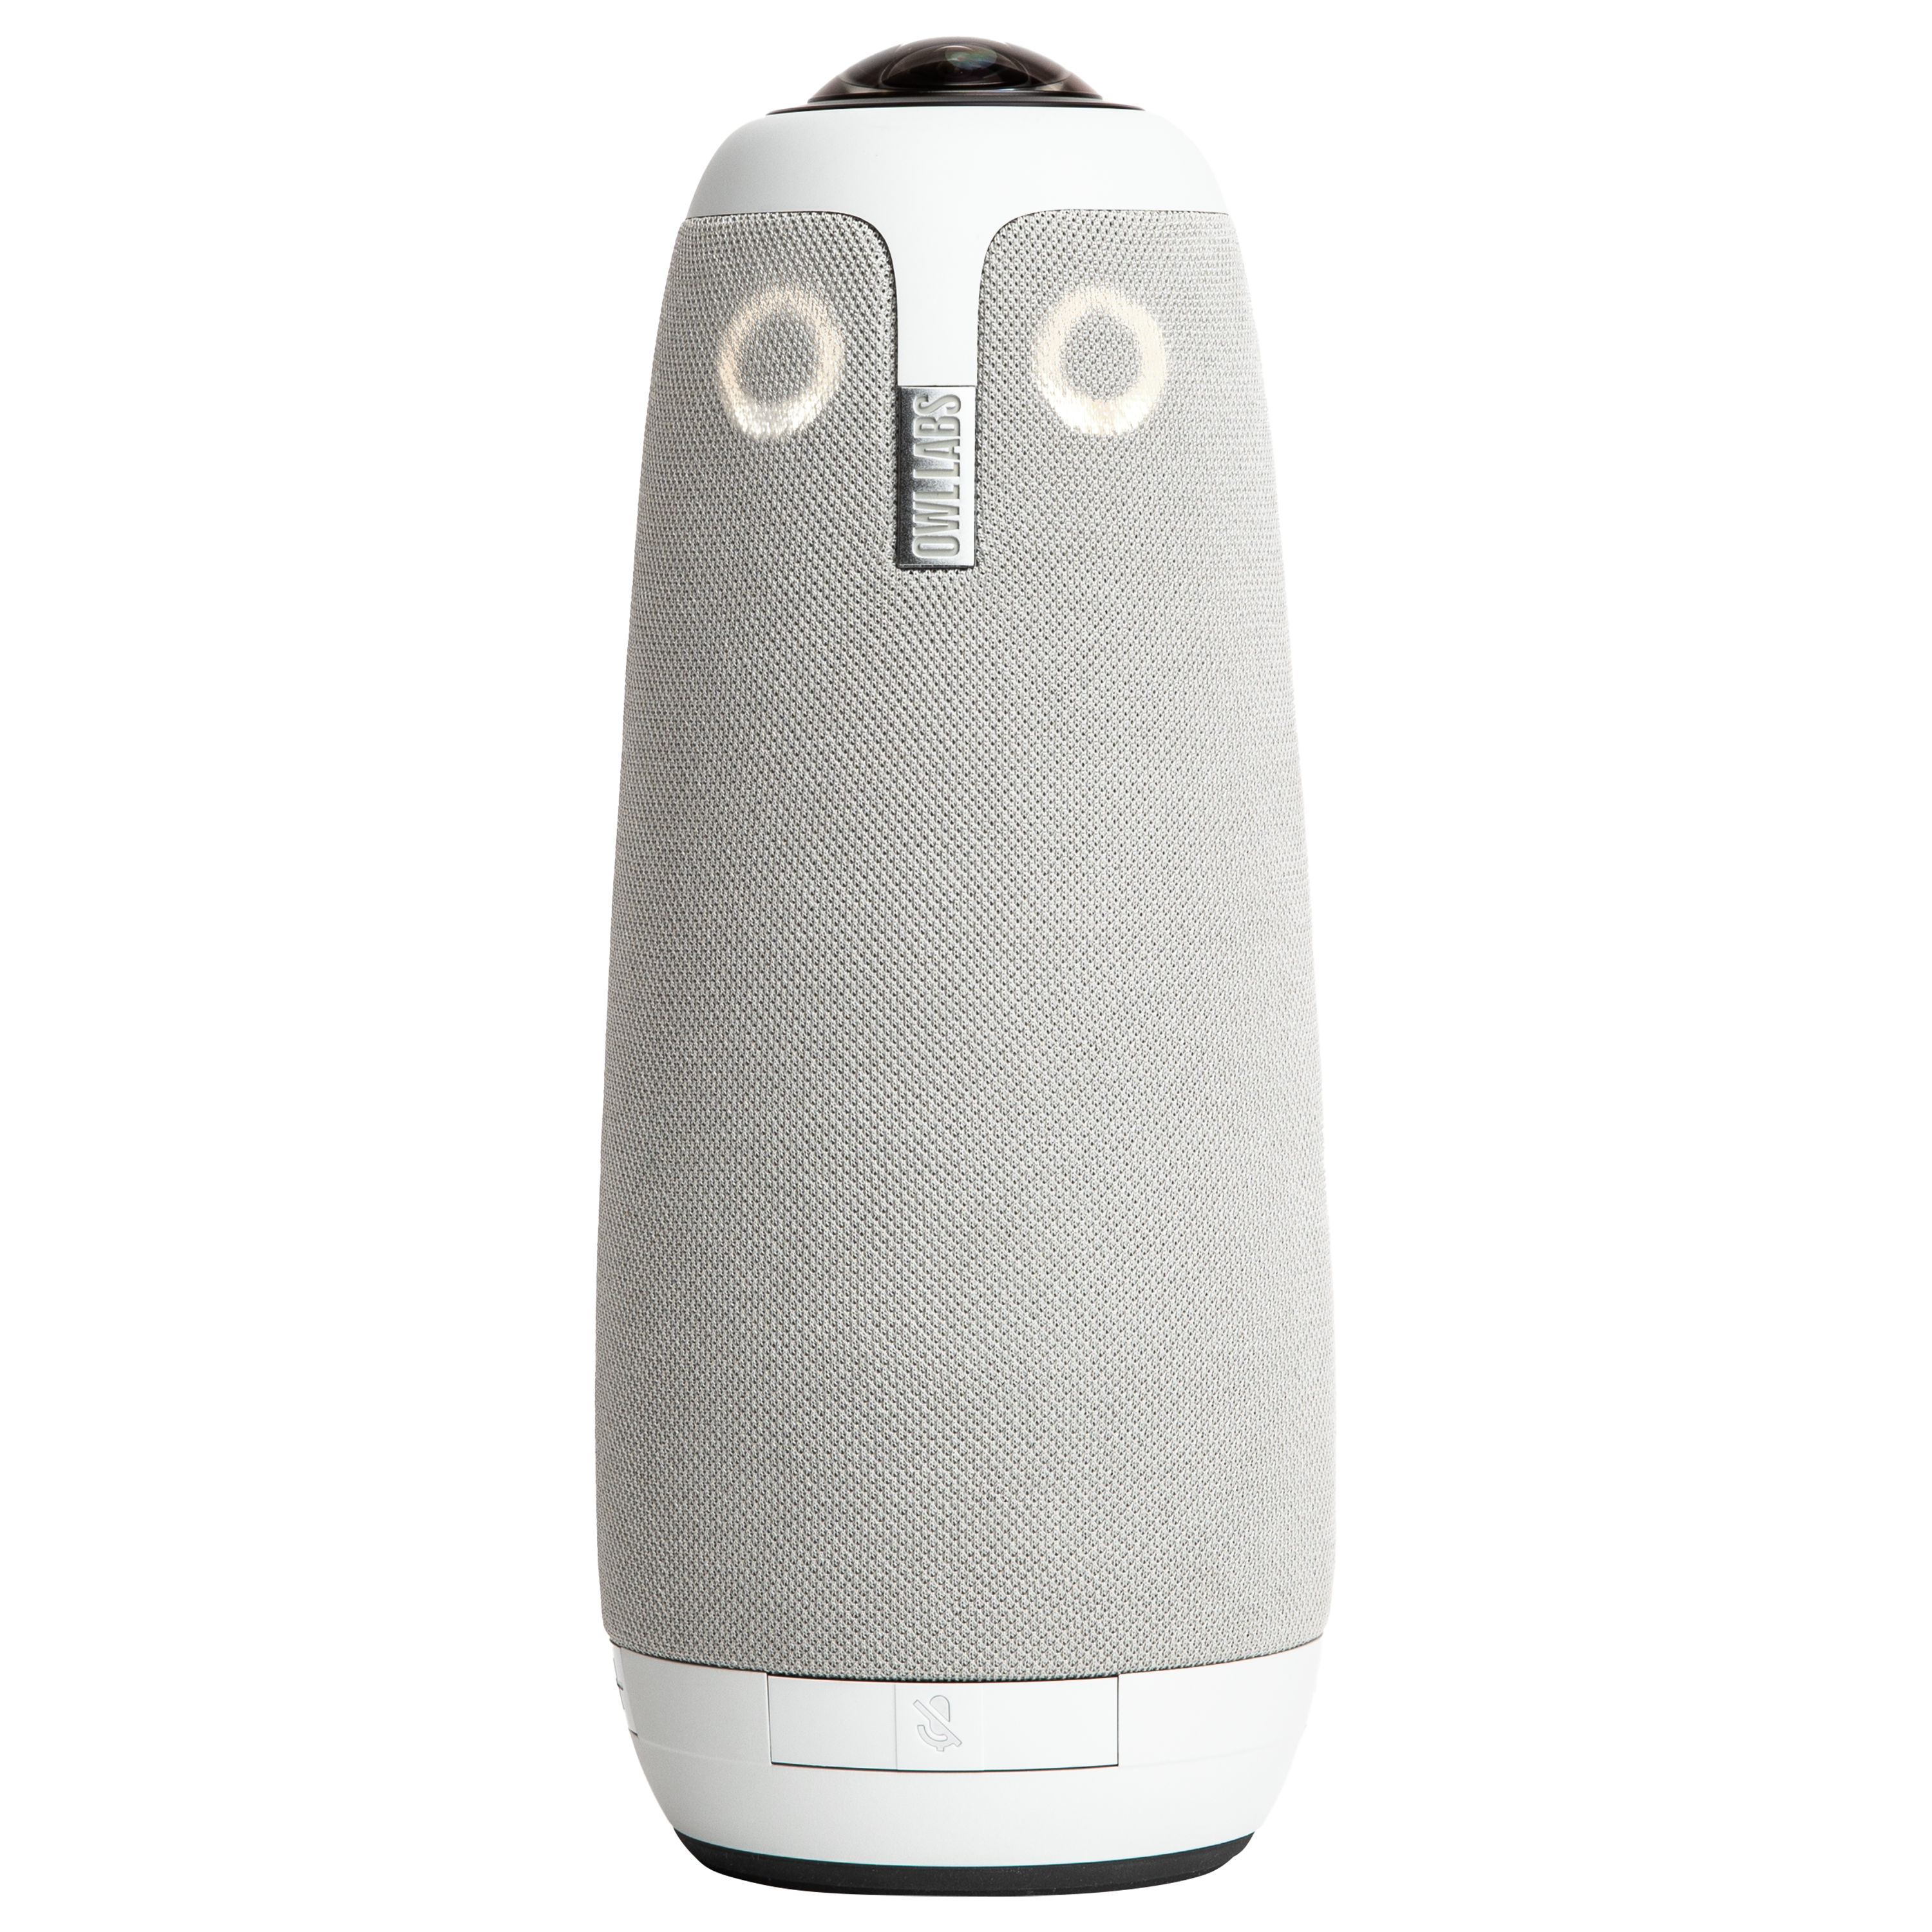 Meeting Owl 3 - 360 Degree, 1080p HD Video Conference Camera